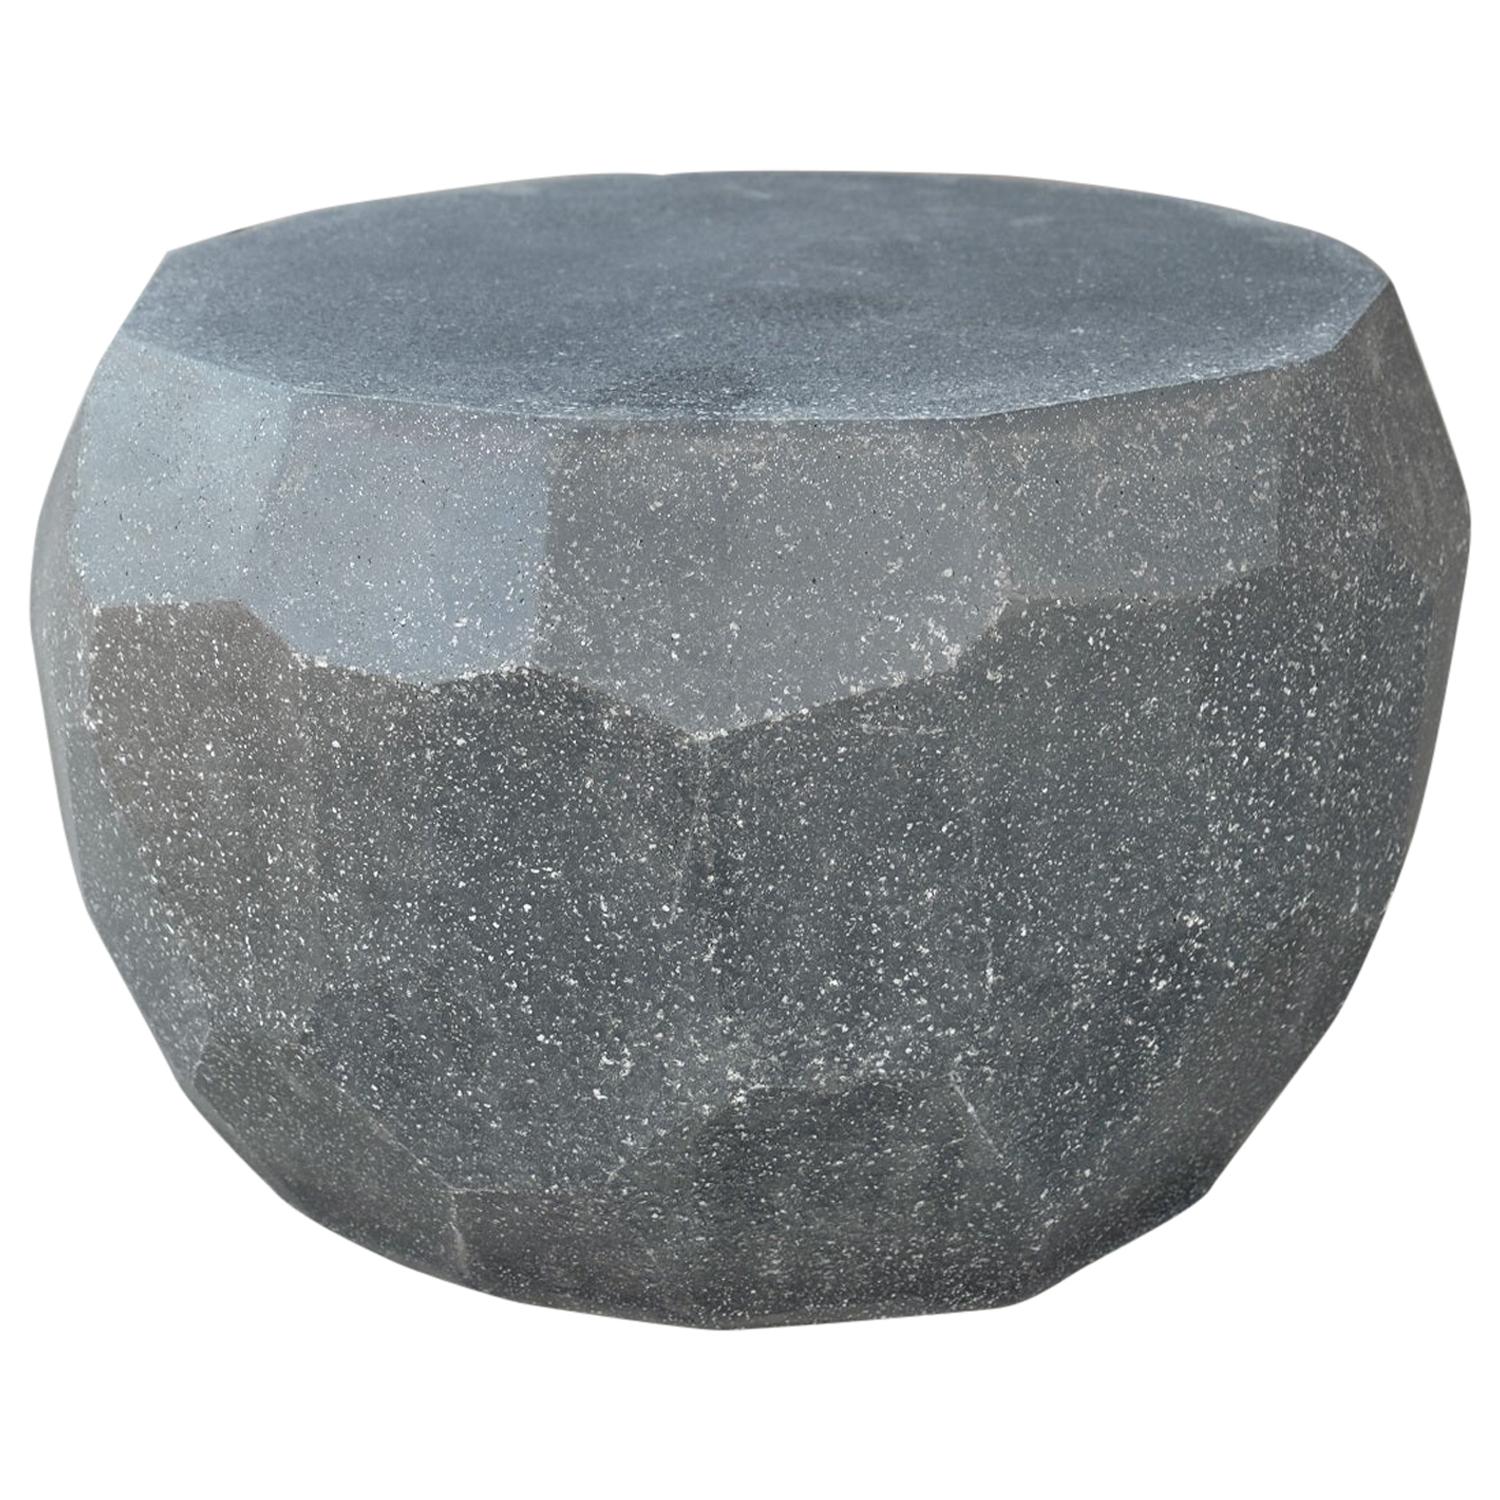 Cast Resin 'Facet' Low Table, Coal Stone Finish by Zachary A. Design